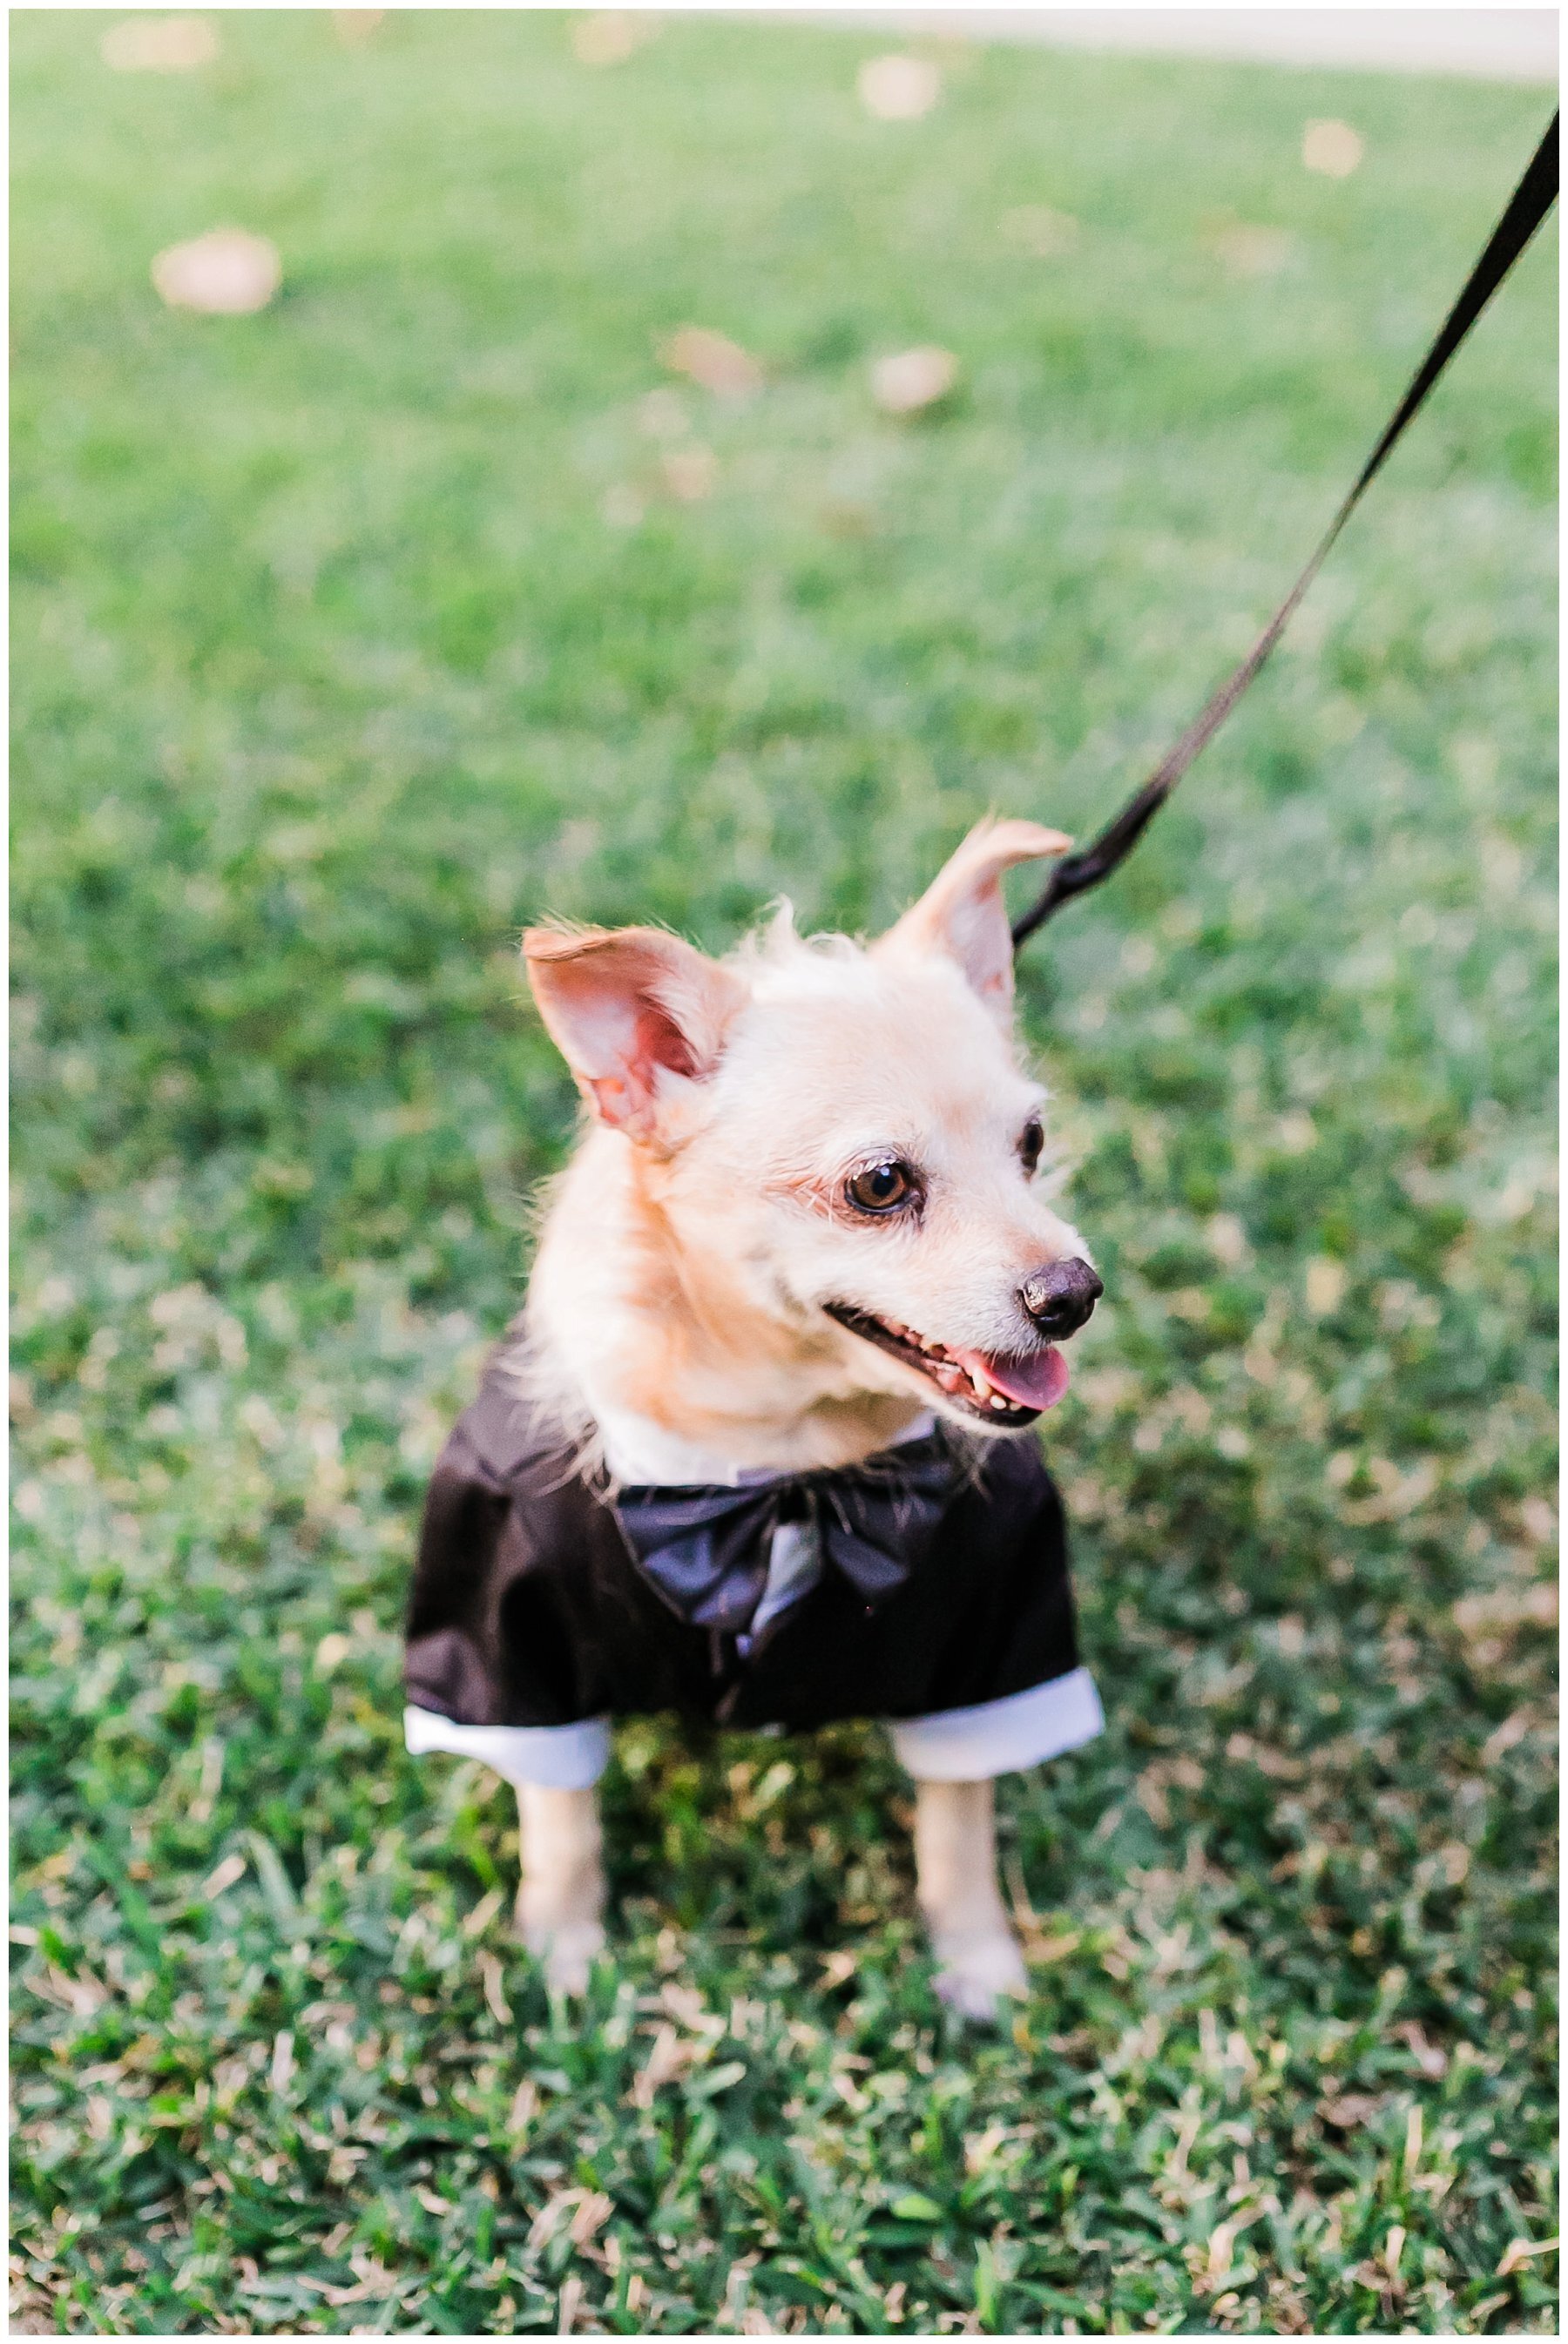  dog in tux outfit 